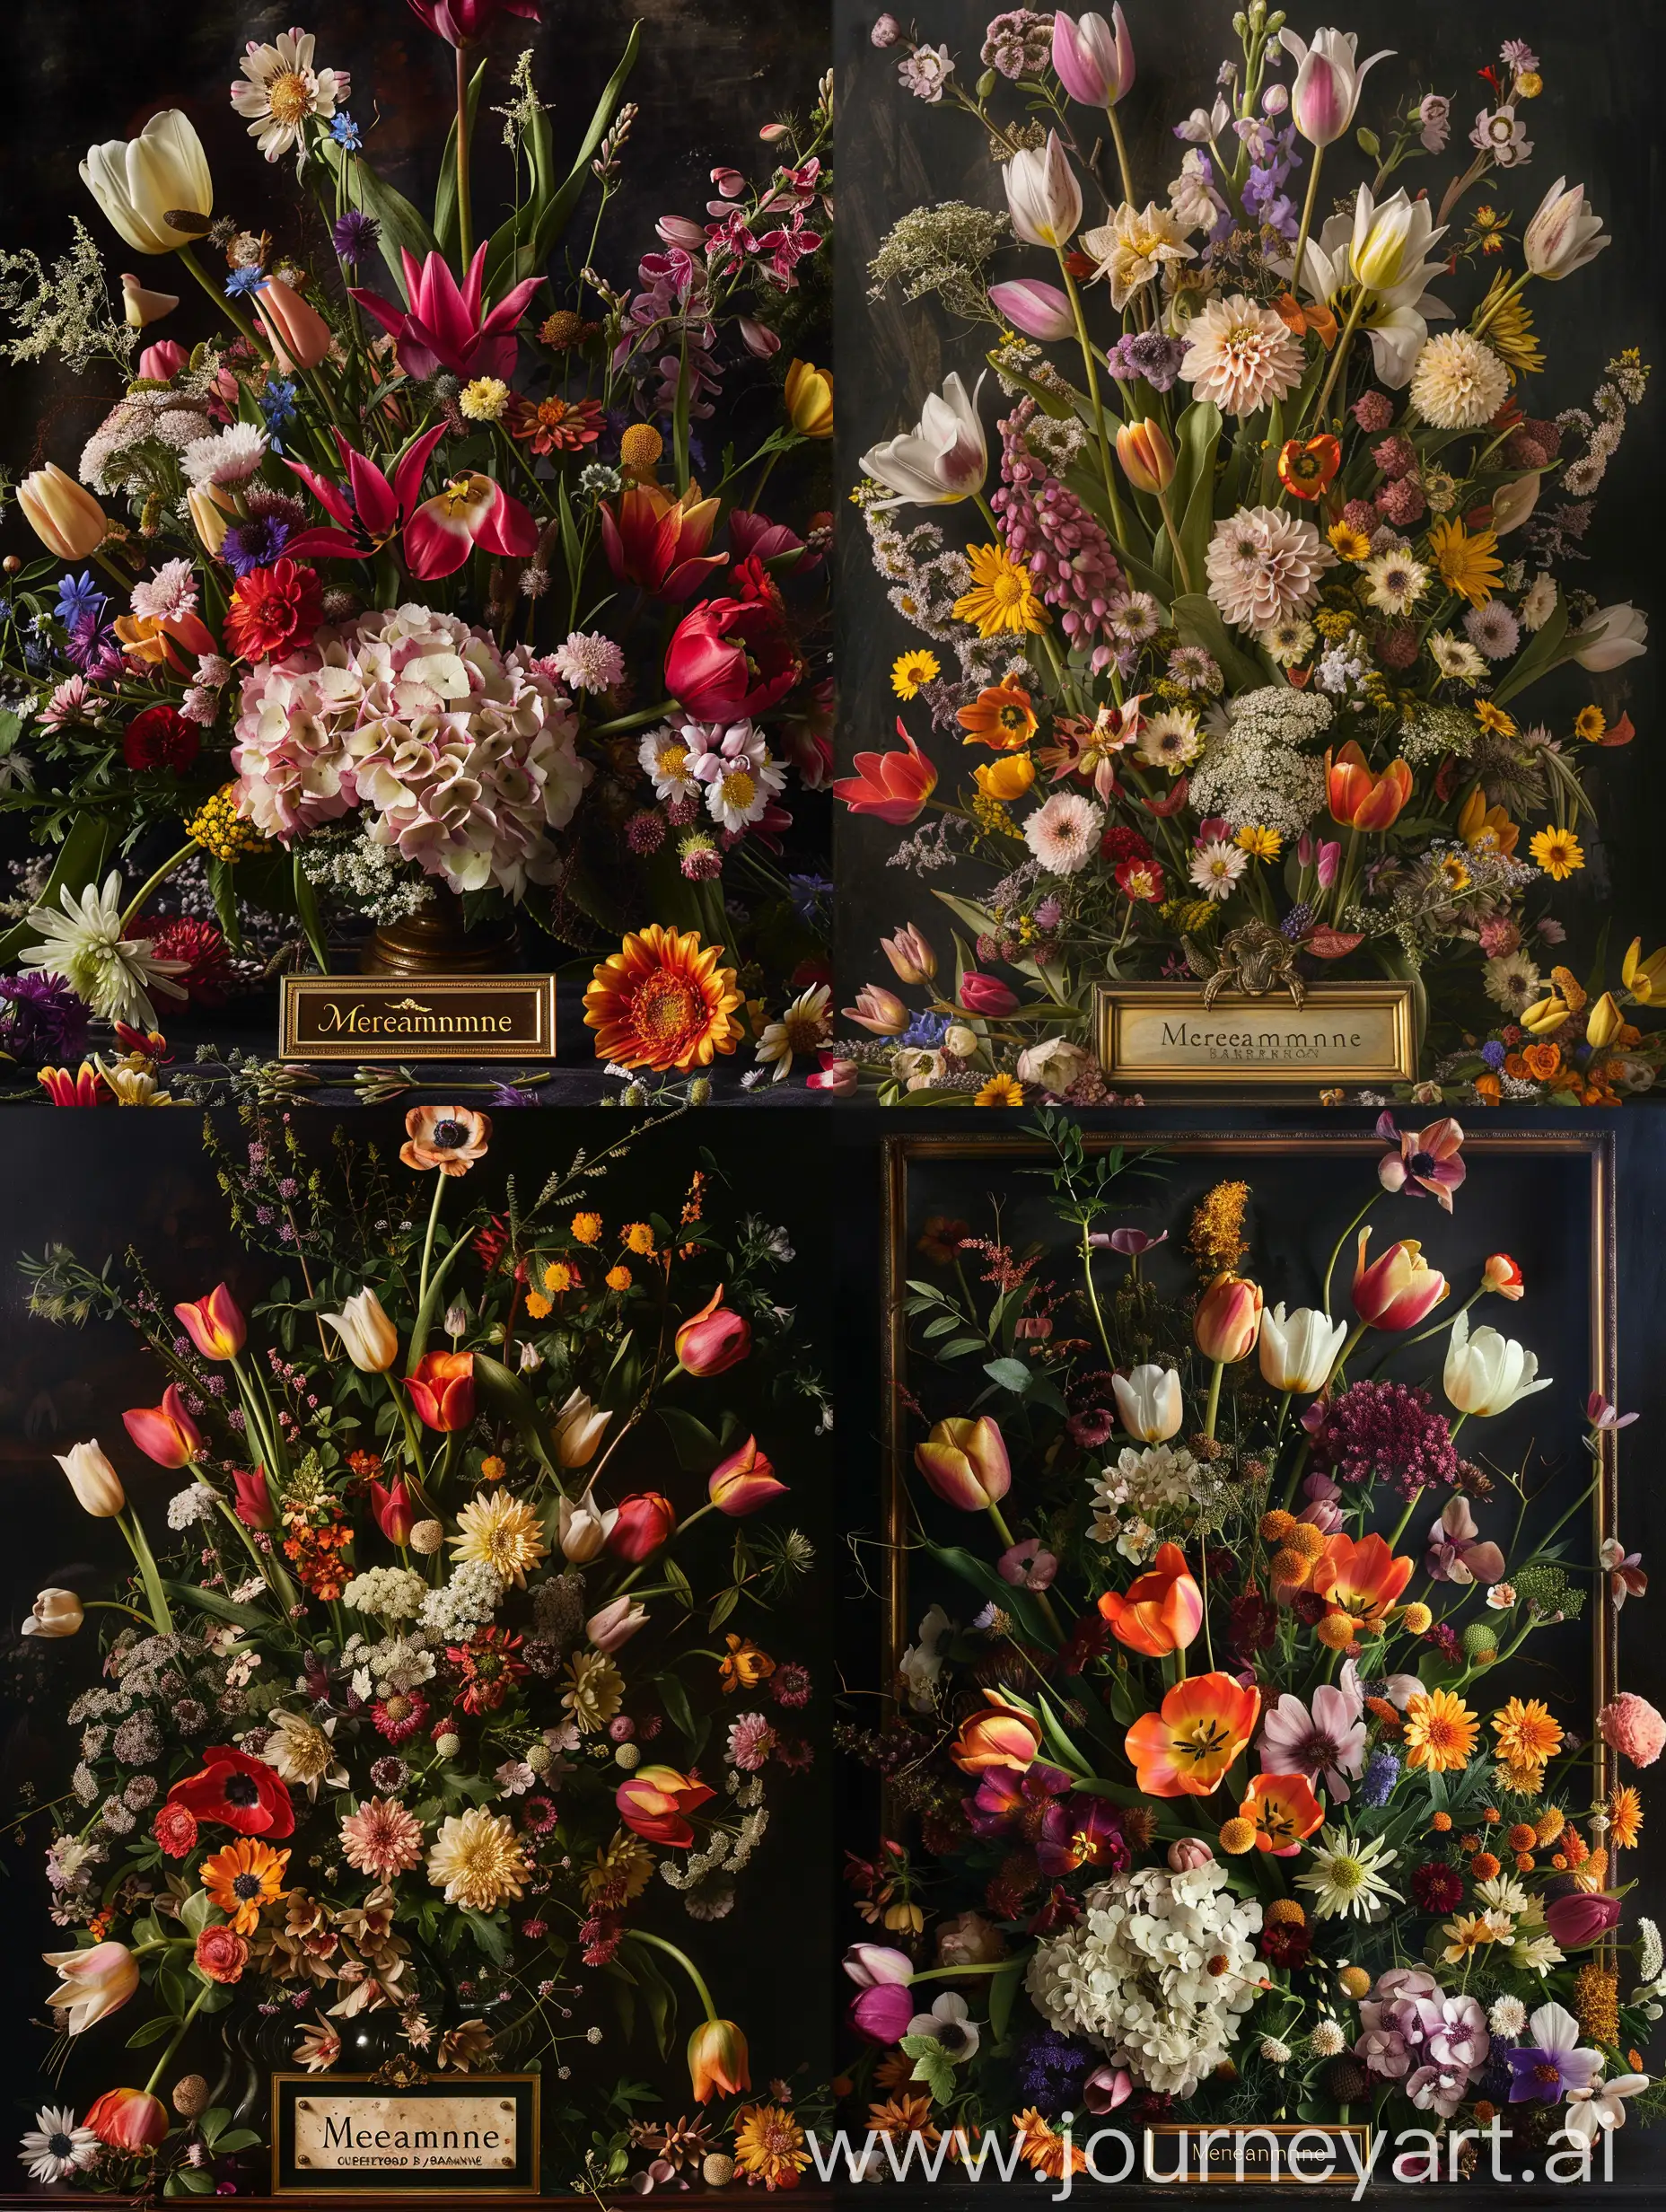 Exquisite-Baroque-Floral-Arrangement-by-Mereamnne-Curated-by-Girard-Barrane